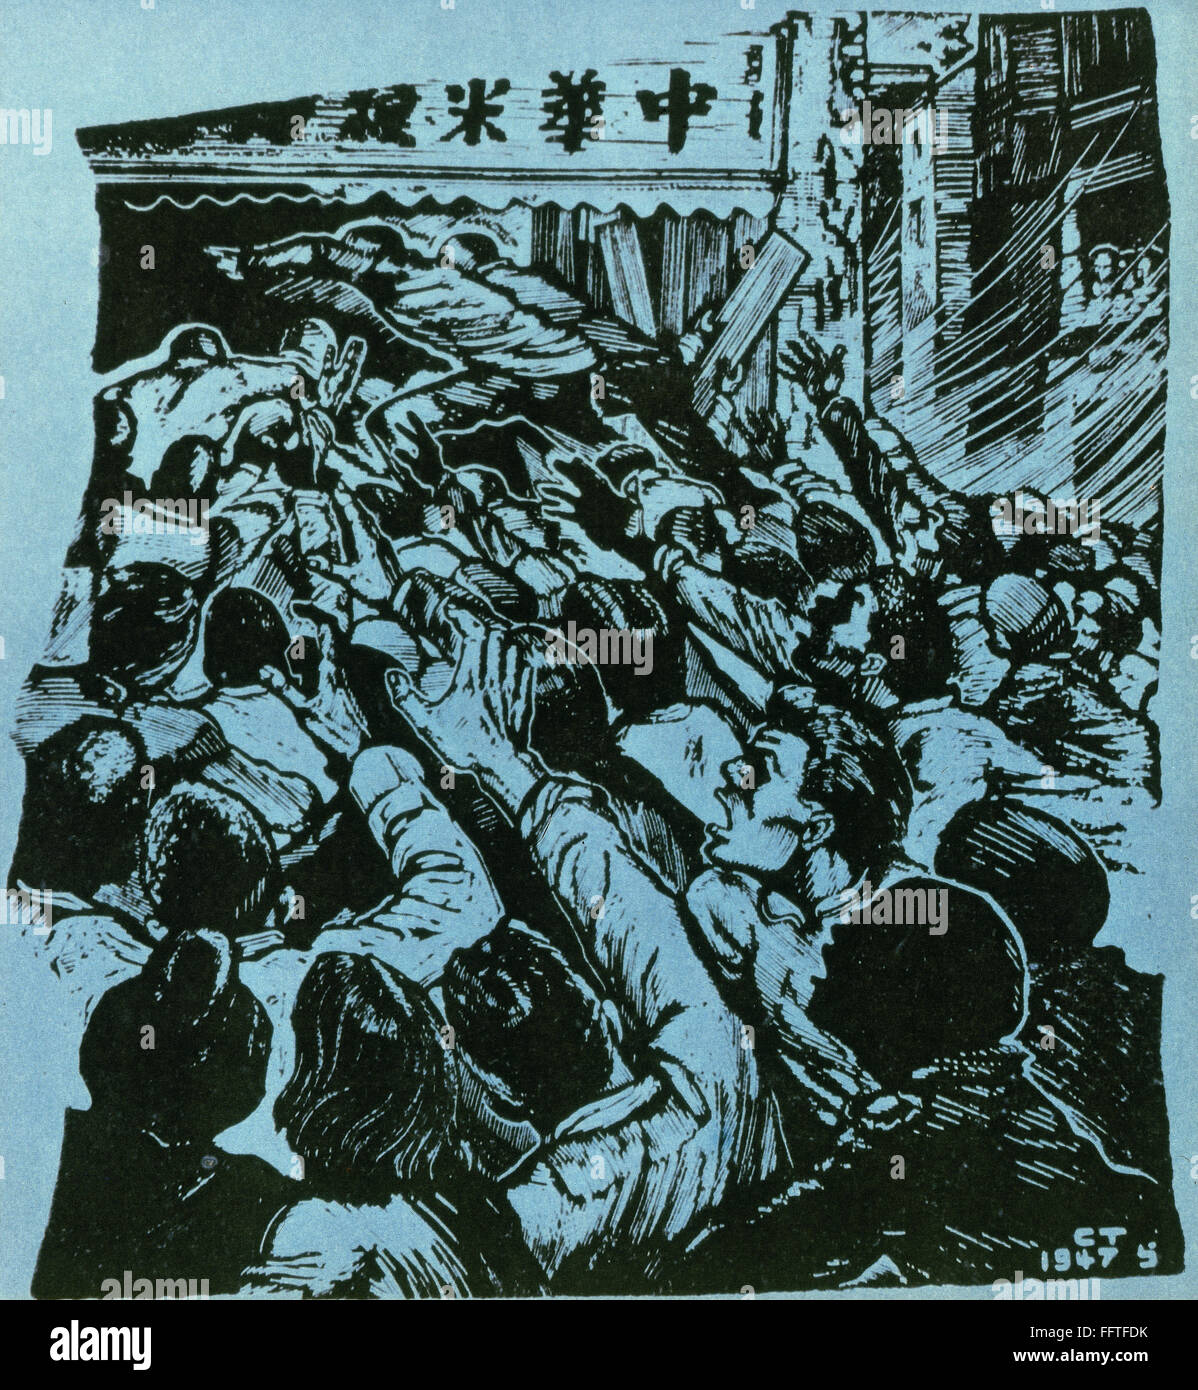 CHINA: FOOD RIOTS, 1947. /nA mob in a Chinese city demanding rice during food  shortages, caused by hoarding and profiteering, at the time of the Chinese  Civil War. Woodcut, 1947, by Chao